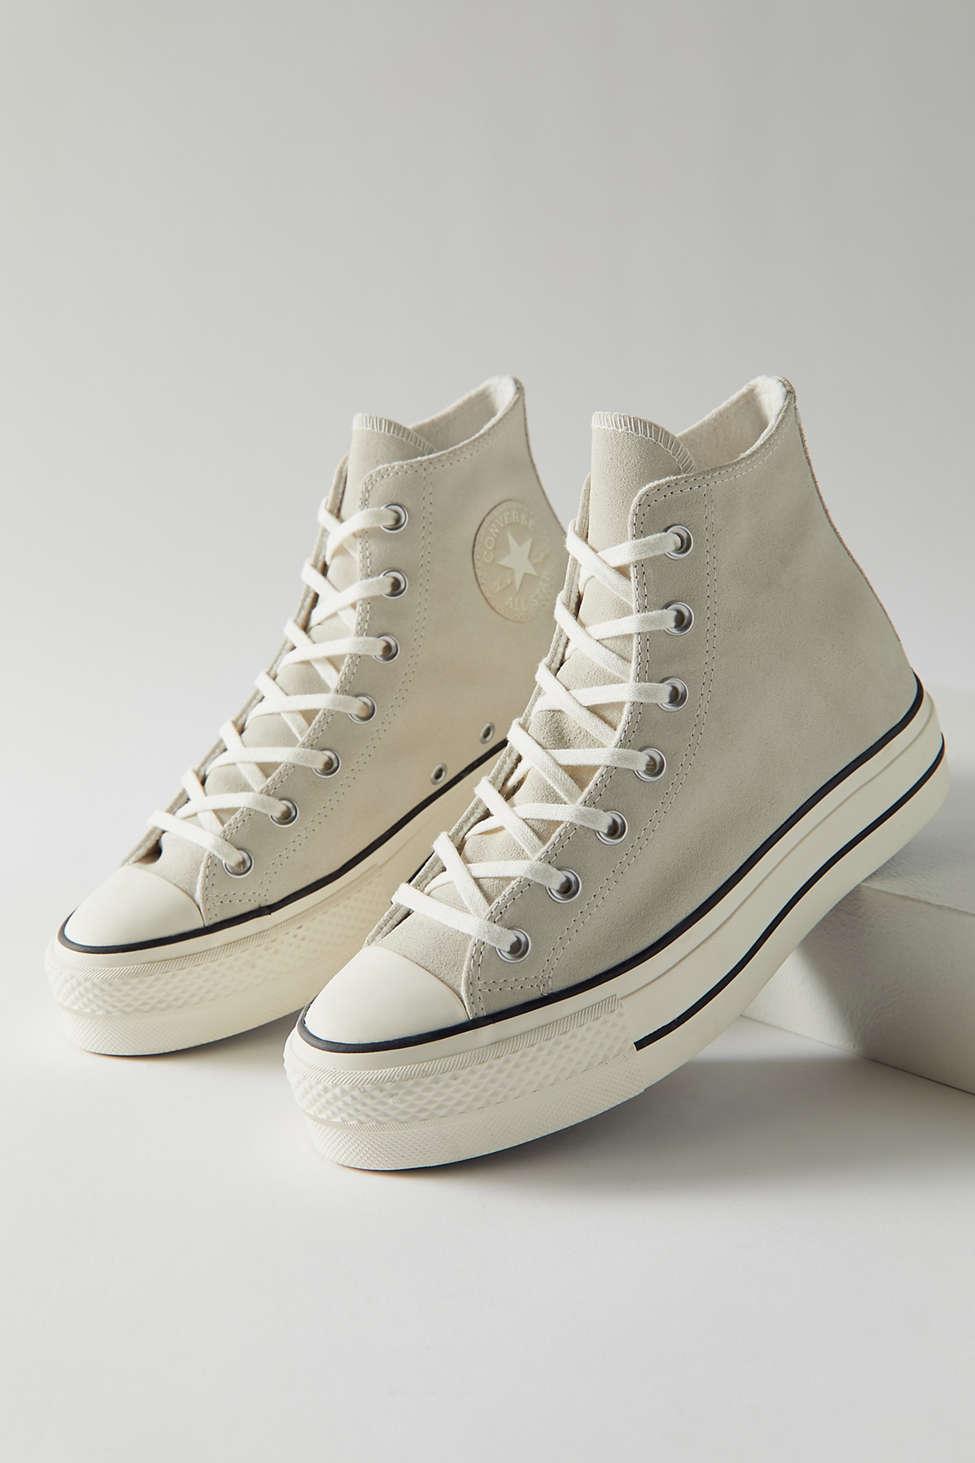 Converse All Star Suede Platform High Top Sneaker in White | Lyst